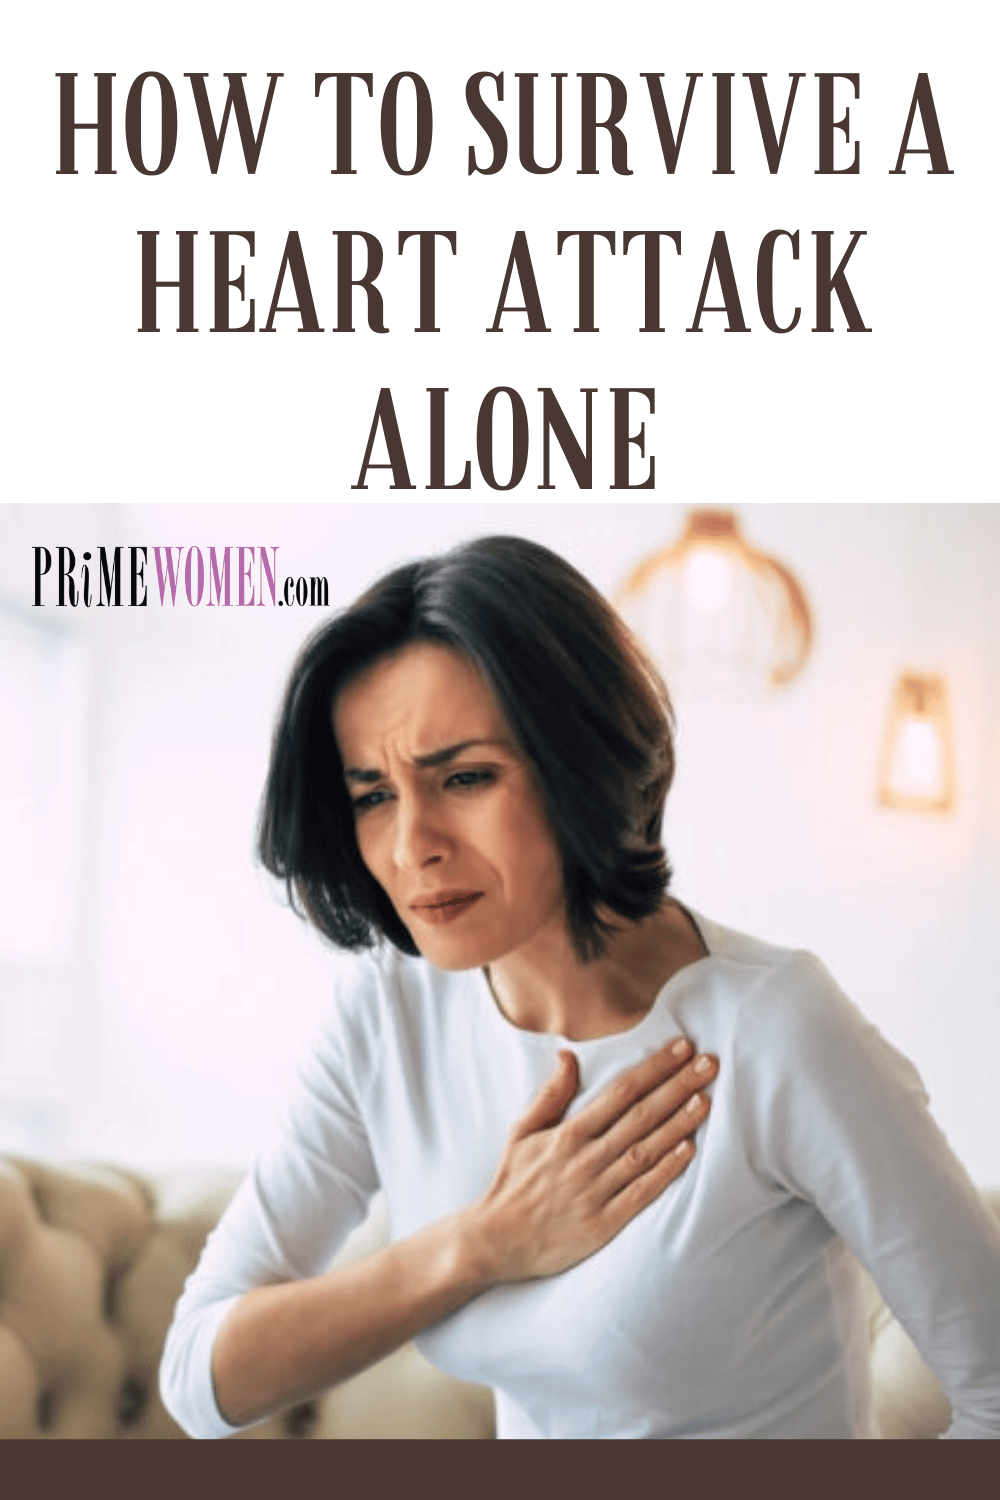 How to survive a heart attack alone